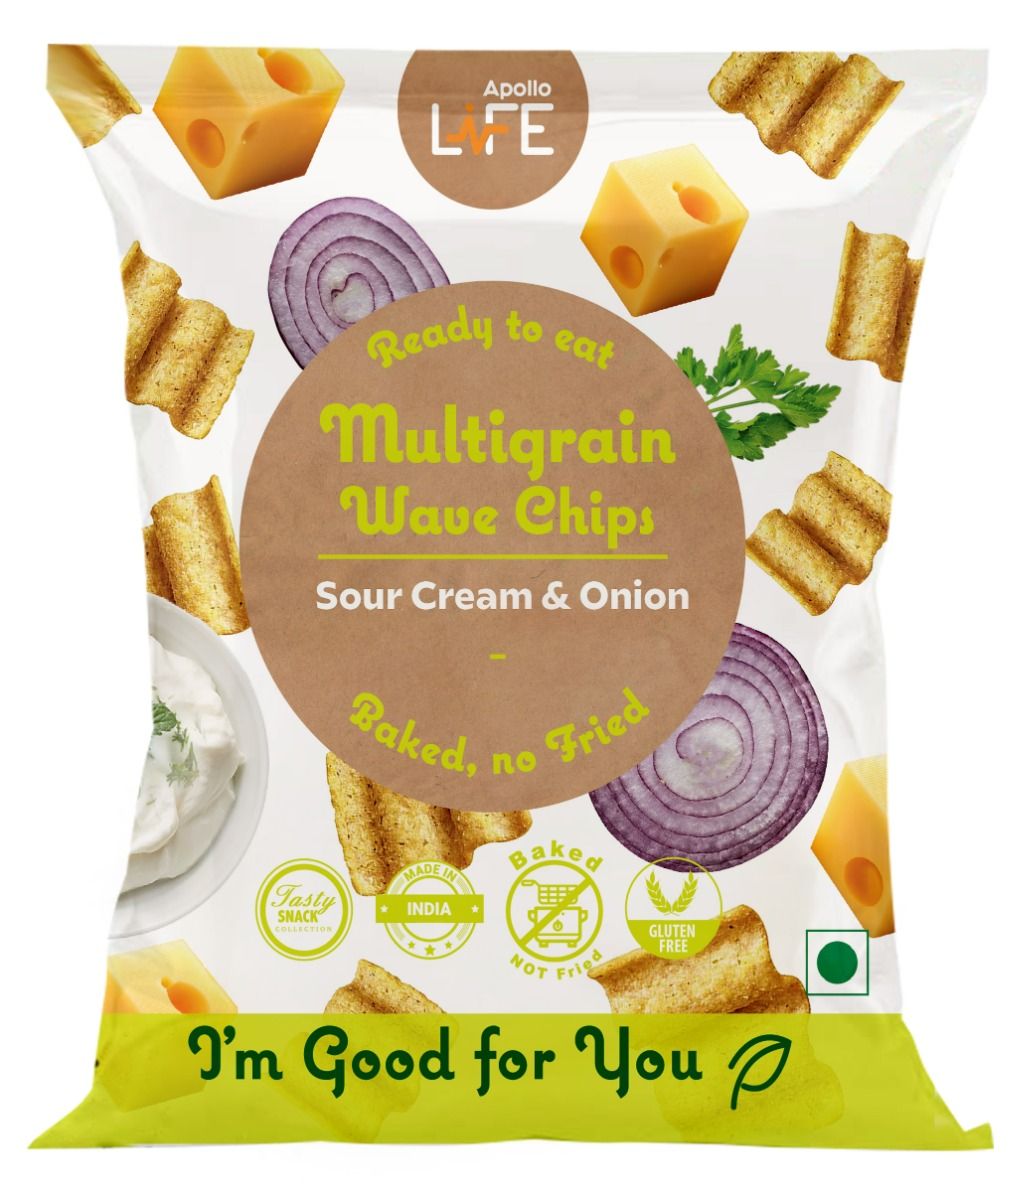 Apollo Life Multigrain Wave Chips with Sour Cream & Onion, 30 gm, Pack of 1 